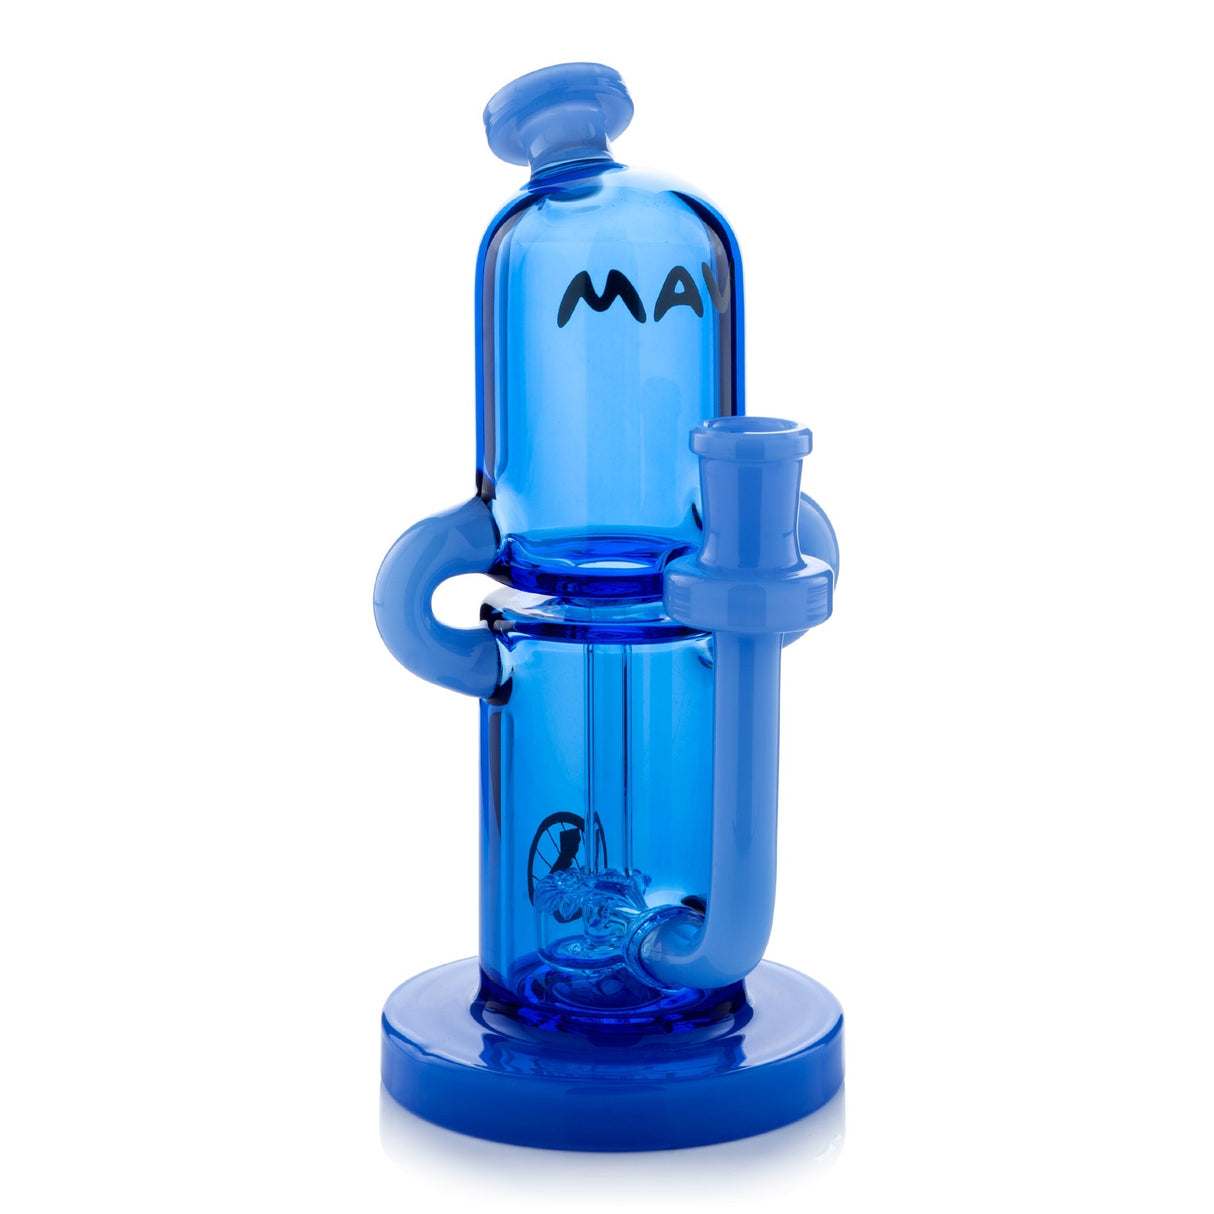 MAV Glass 2-Tone Double Uptake Pillbox Rig in Blue - Front View